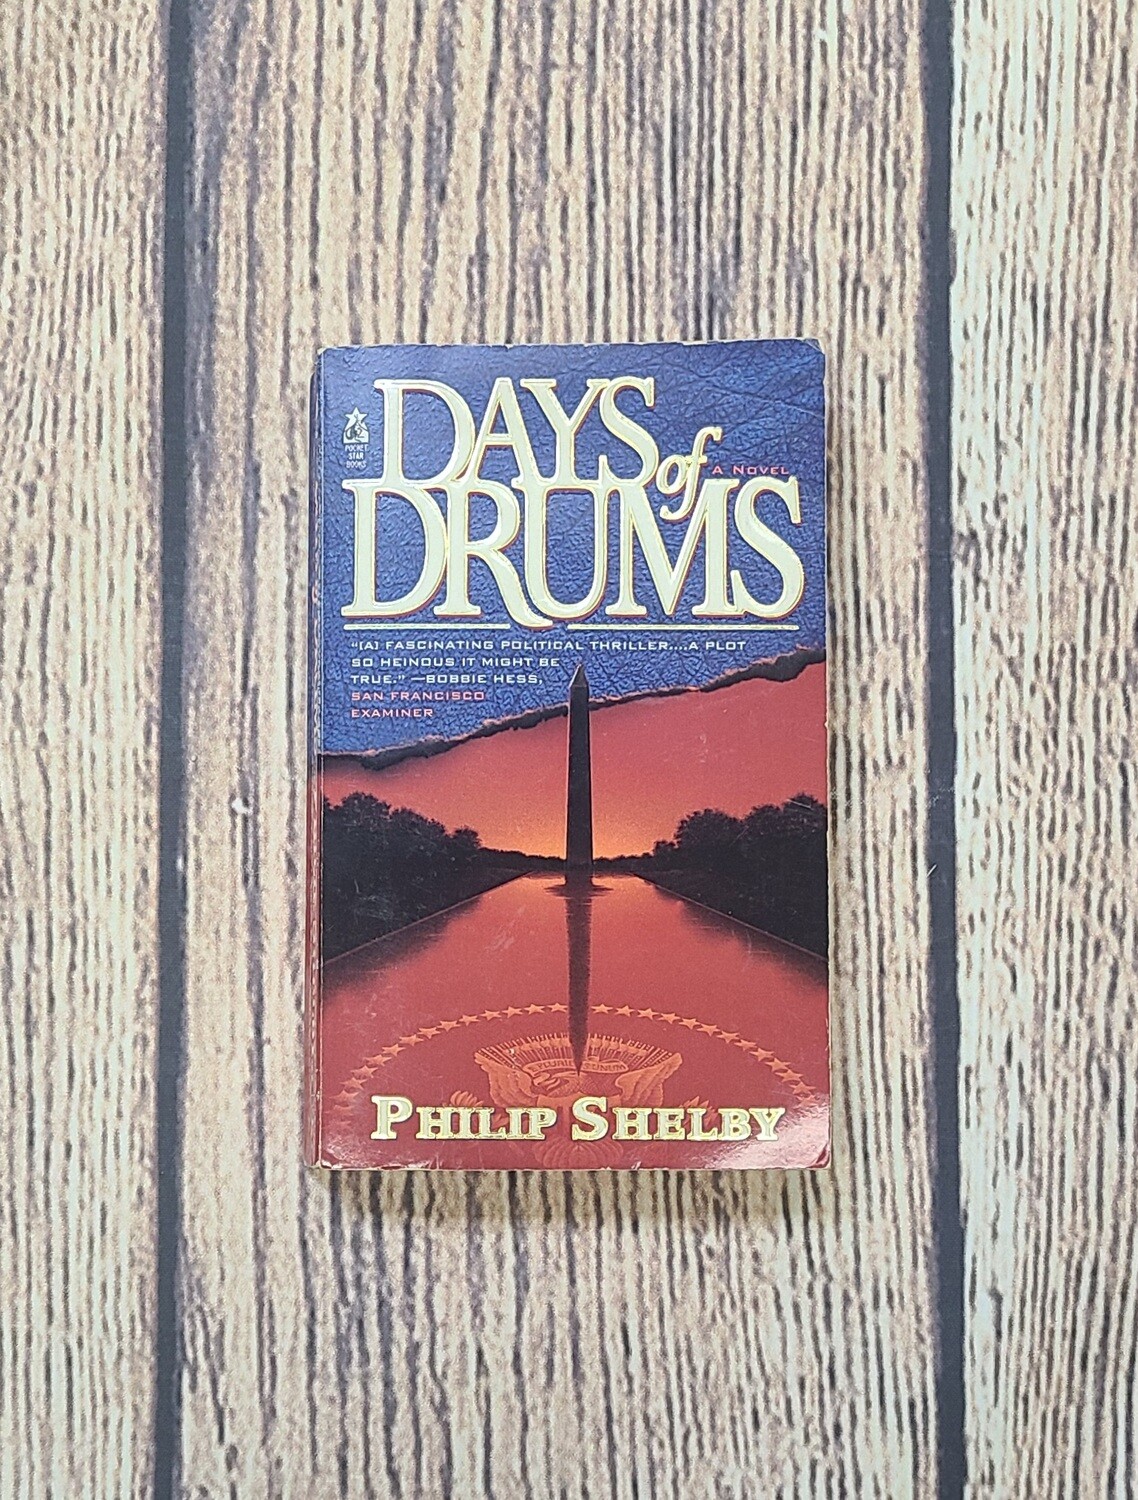 Days of Drums by Philip Shelby